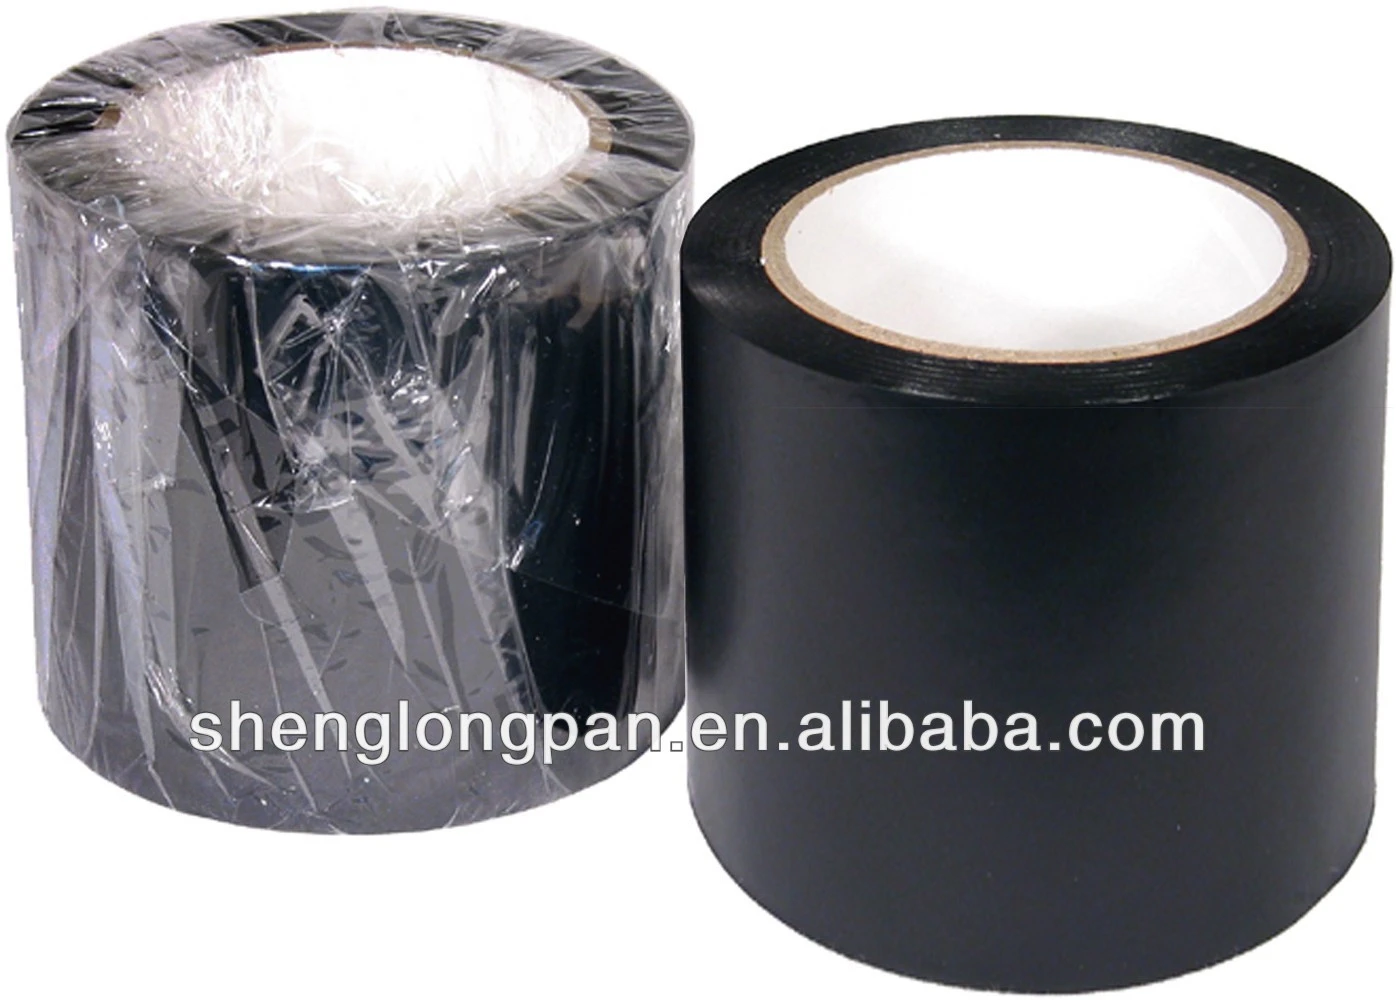 PVC tape for insulate electrical wires